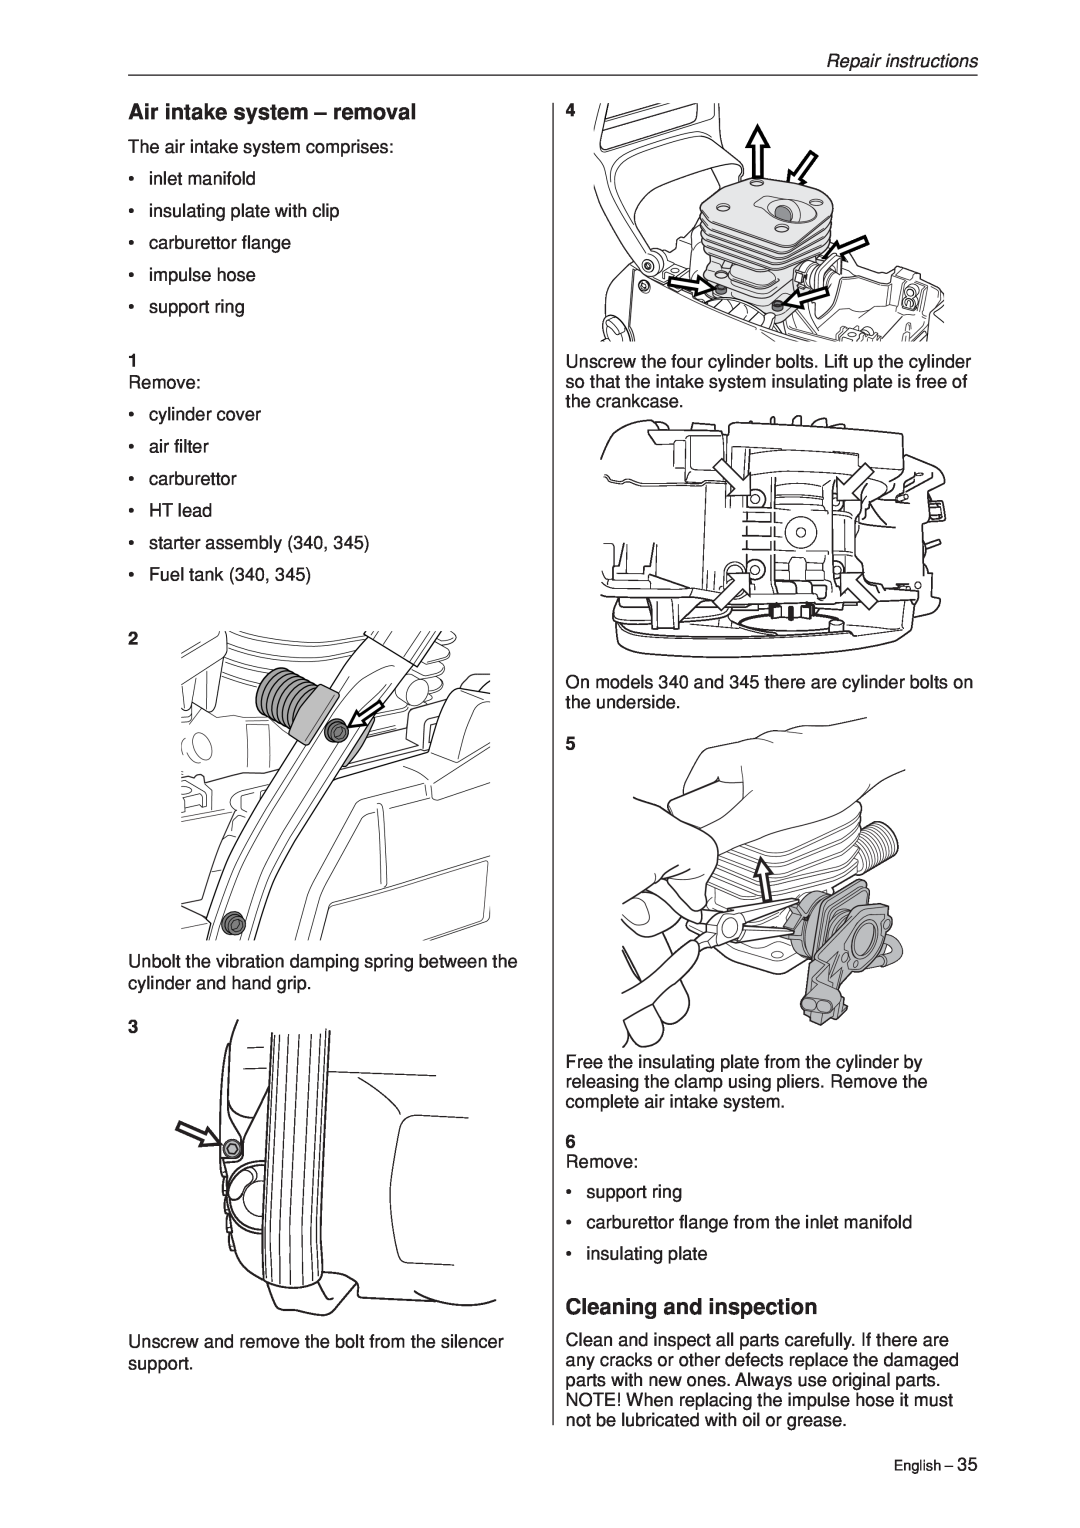 Husqvarna 340, 345, 346XP,350, 351, 353 manual Air intake system - removal, Cleaning and inspection, Repair instructions 